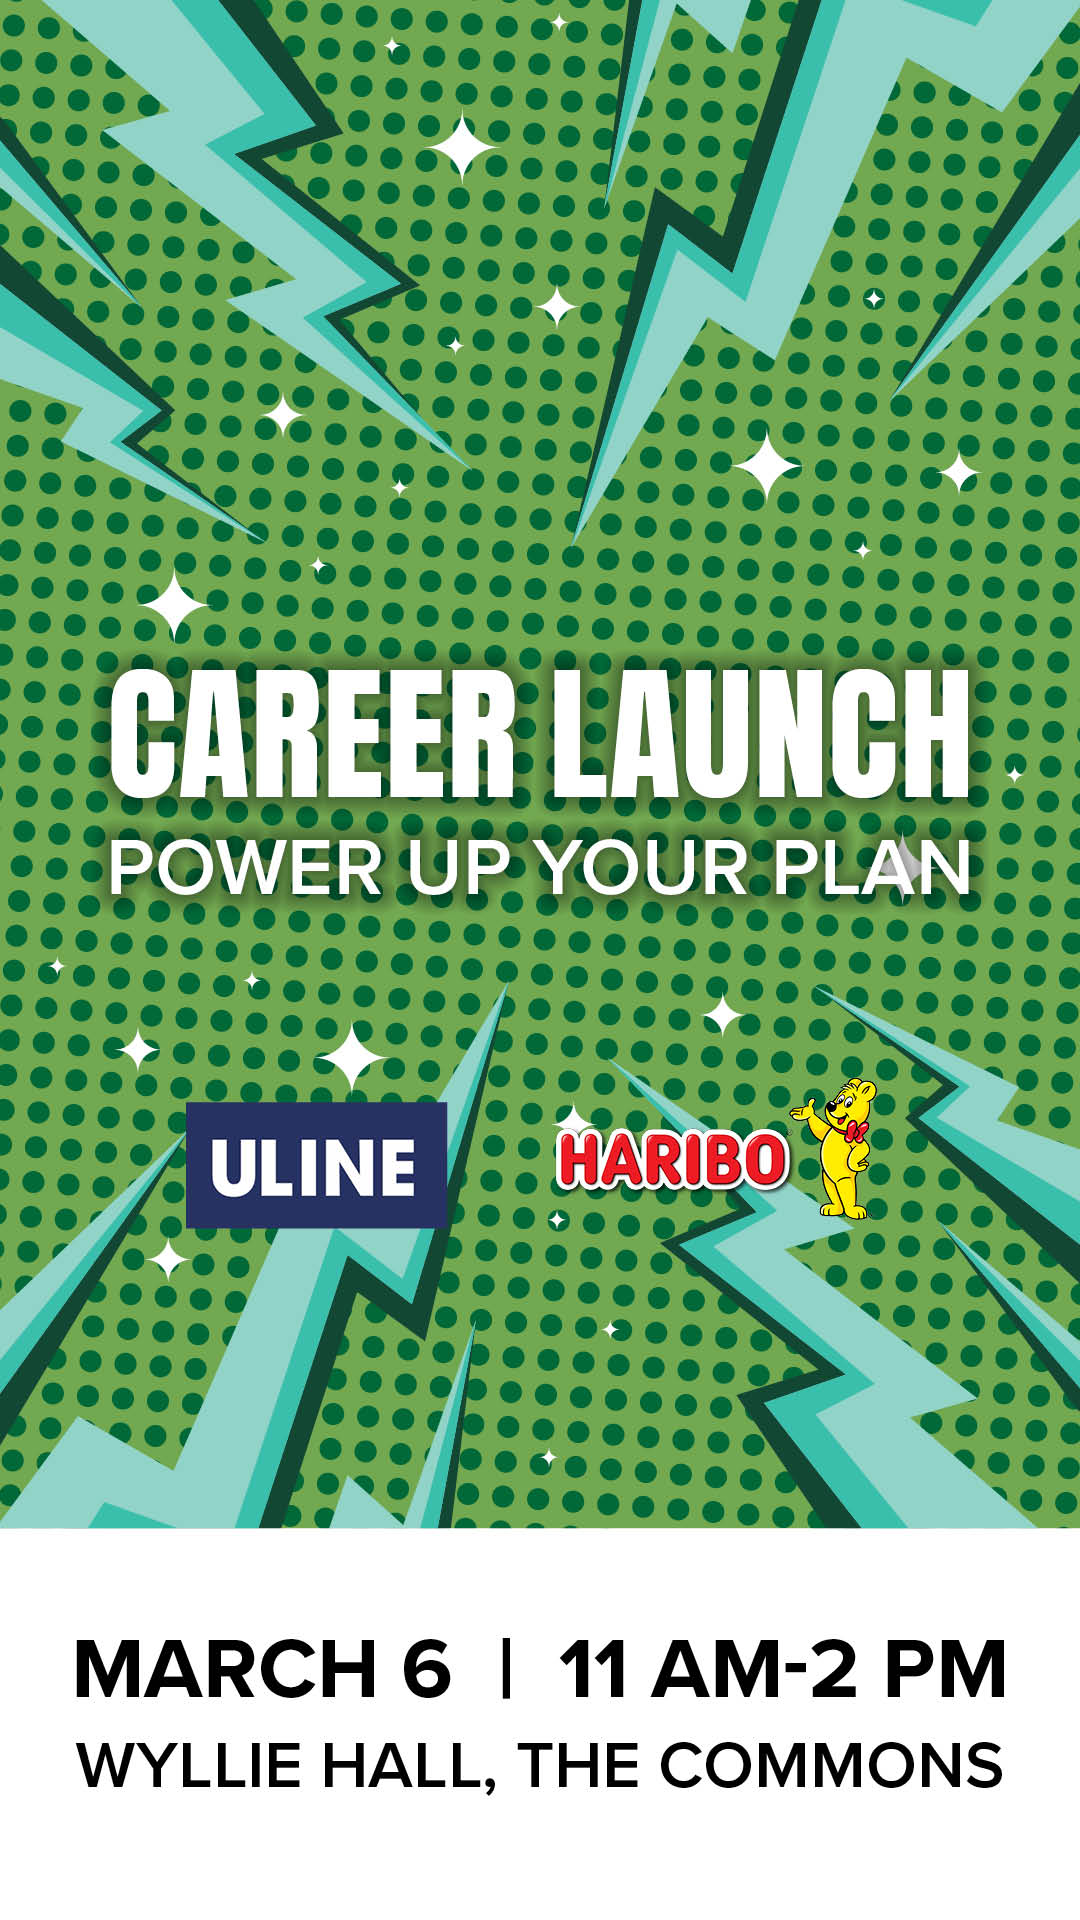 New version career launch - long